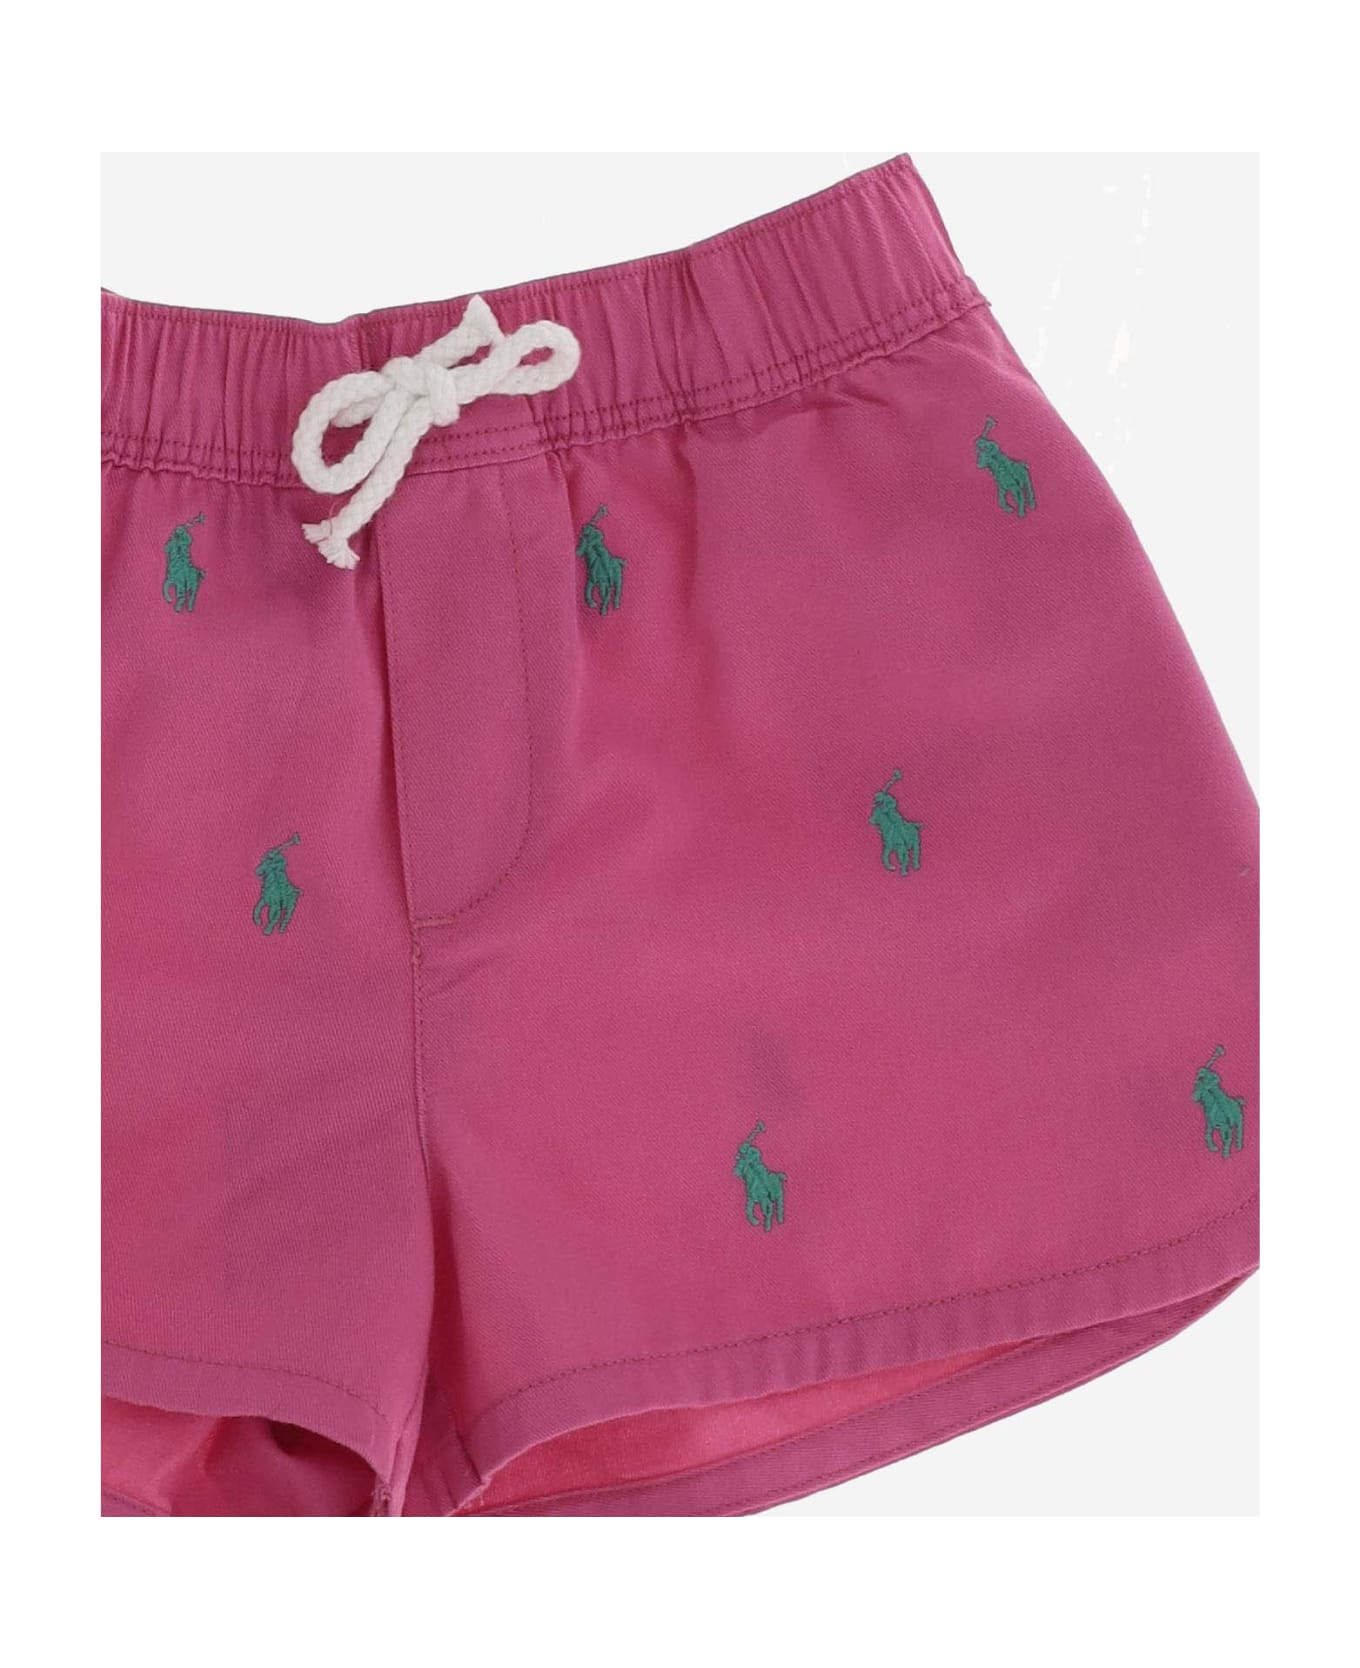 Polo Ralph Lauren Cotton Short Pants With Logo - Pink ボトムス